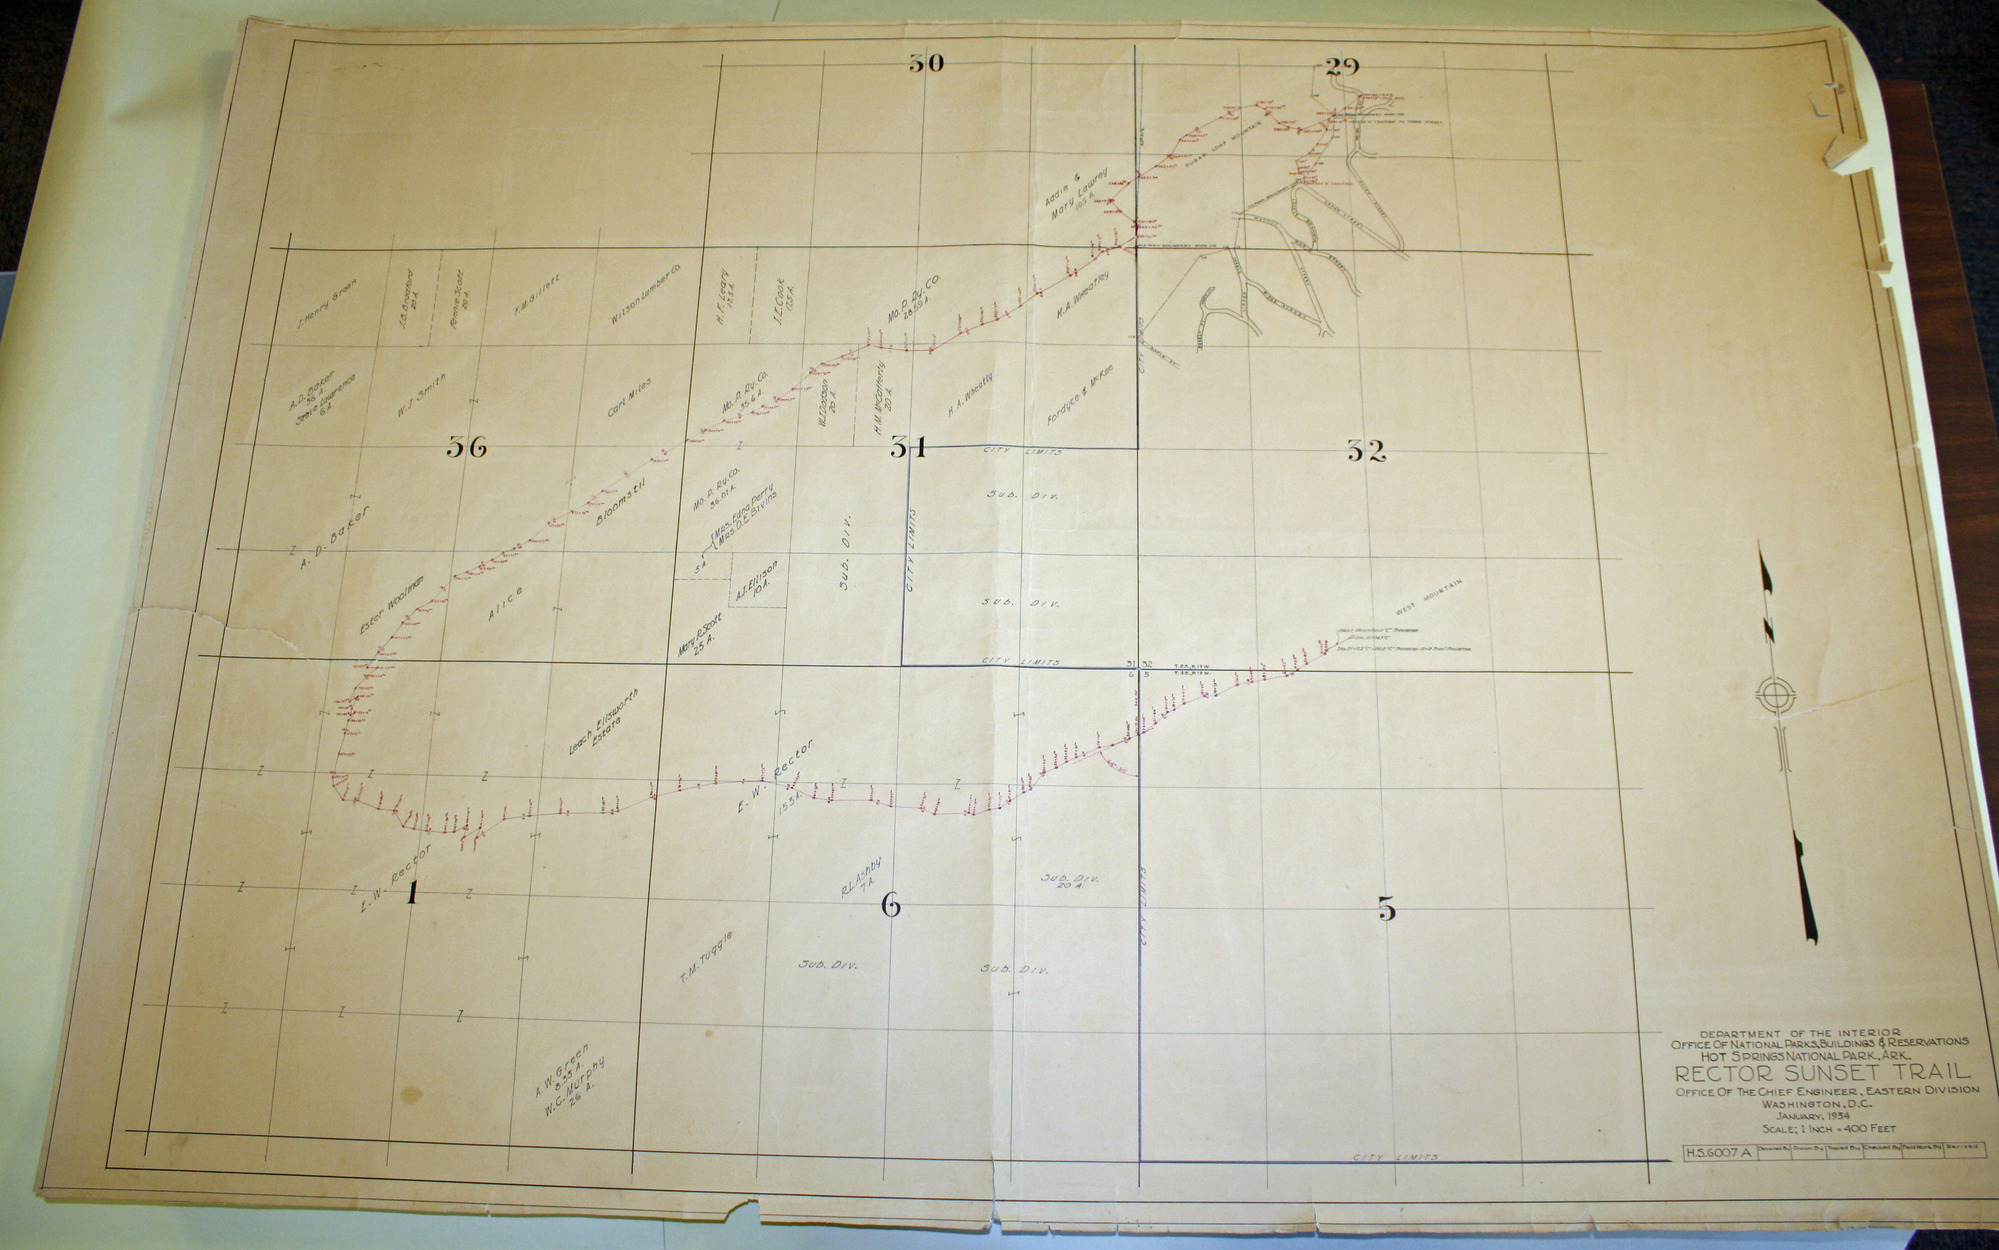 Map of Rector Sunset Trail, January 1934. Sections 29-32, 36, 1, 6, and 5. West Mountain and Sugerloaf Mountain. Paper. Sunset Trail depicted in red against plats in black lines.